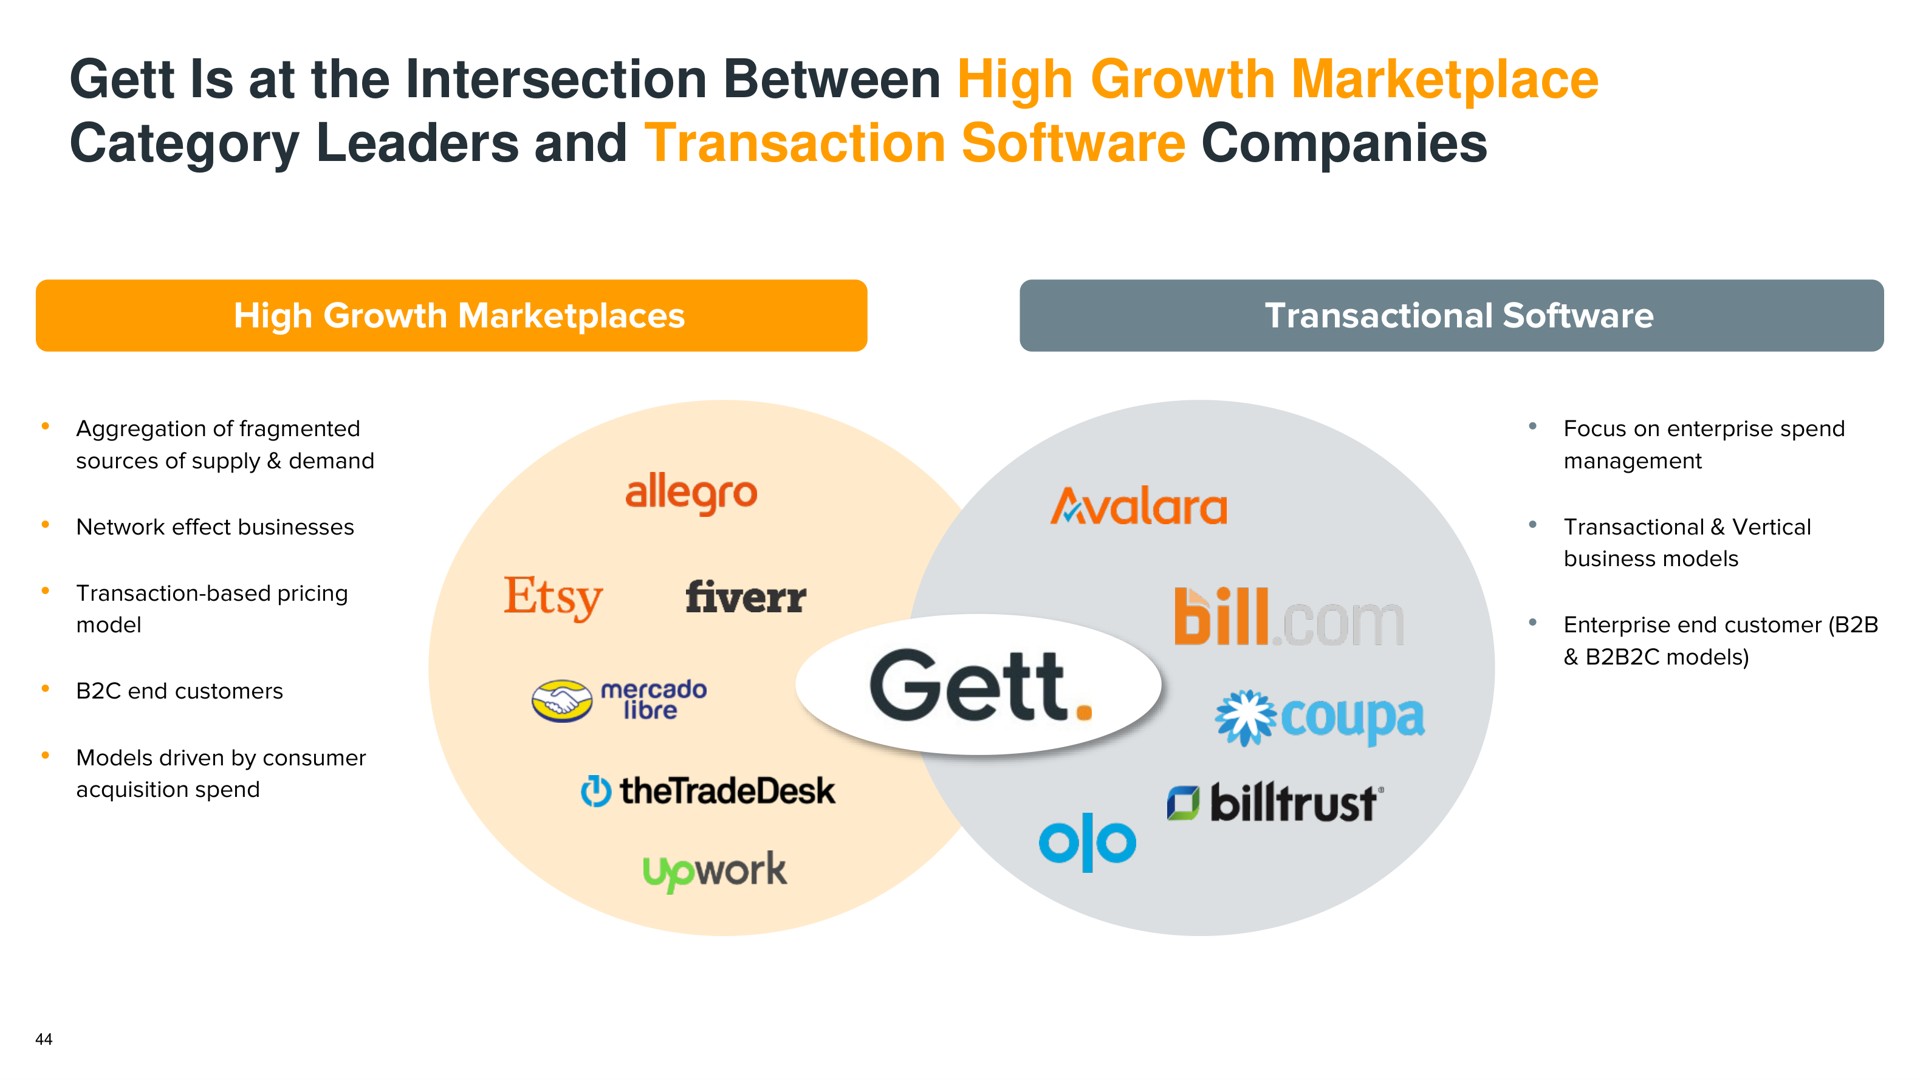 is at the intersection between high growth category leaders and transaction companies allegro | Gett